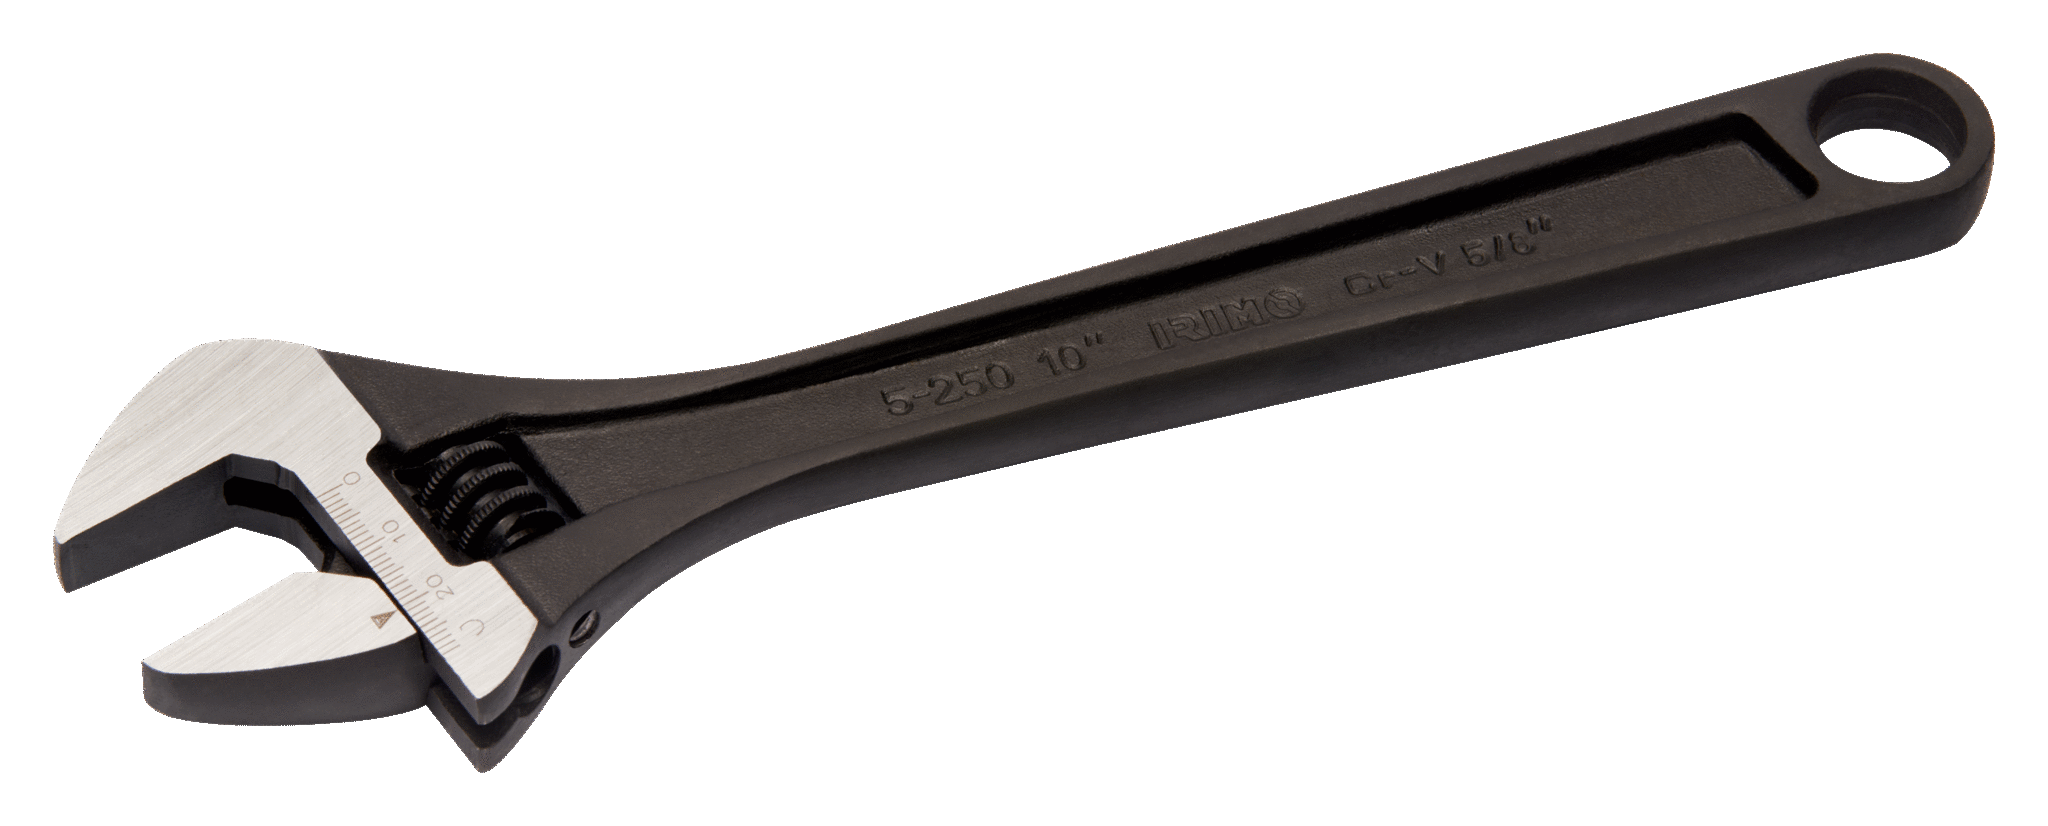 3.5mm Pin Wrench For Printing Presses 